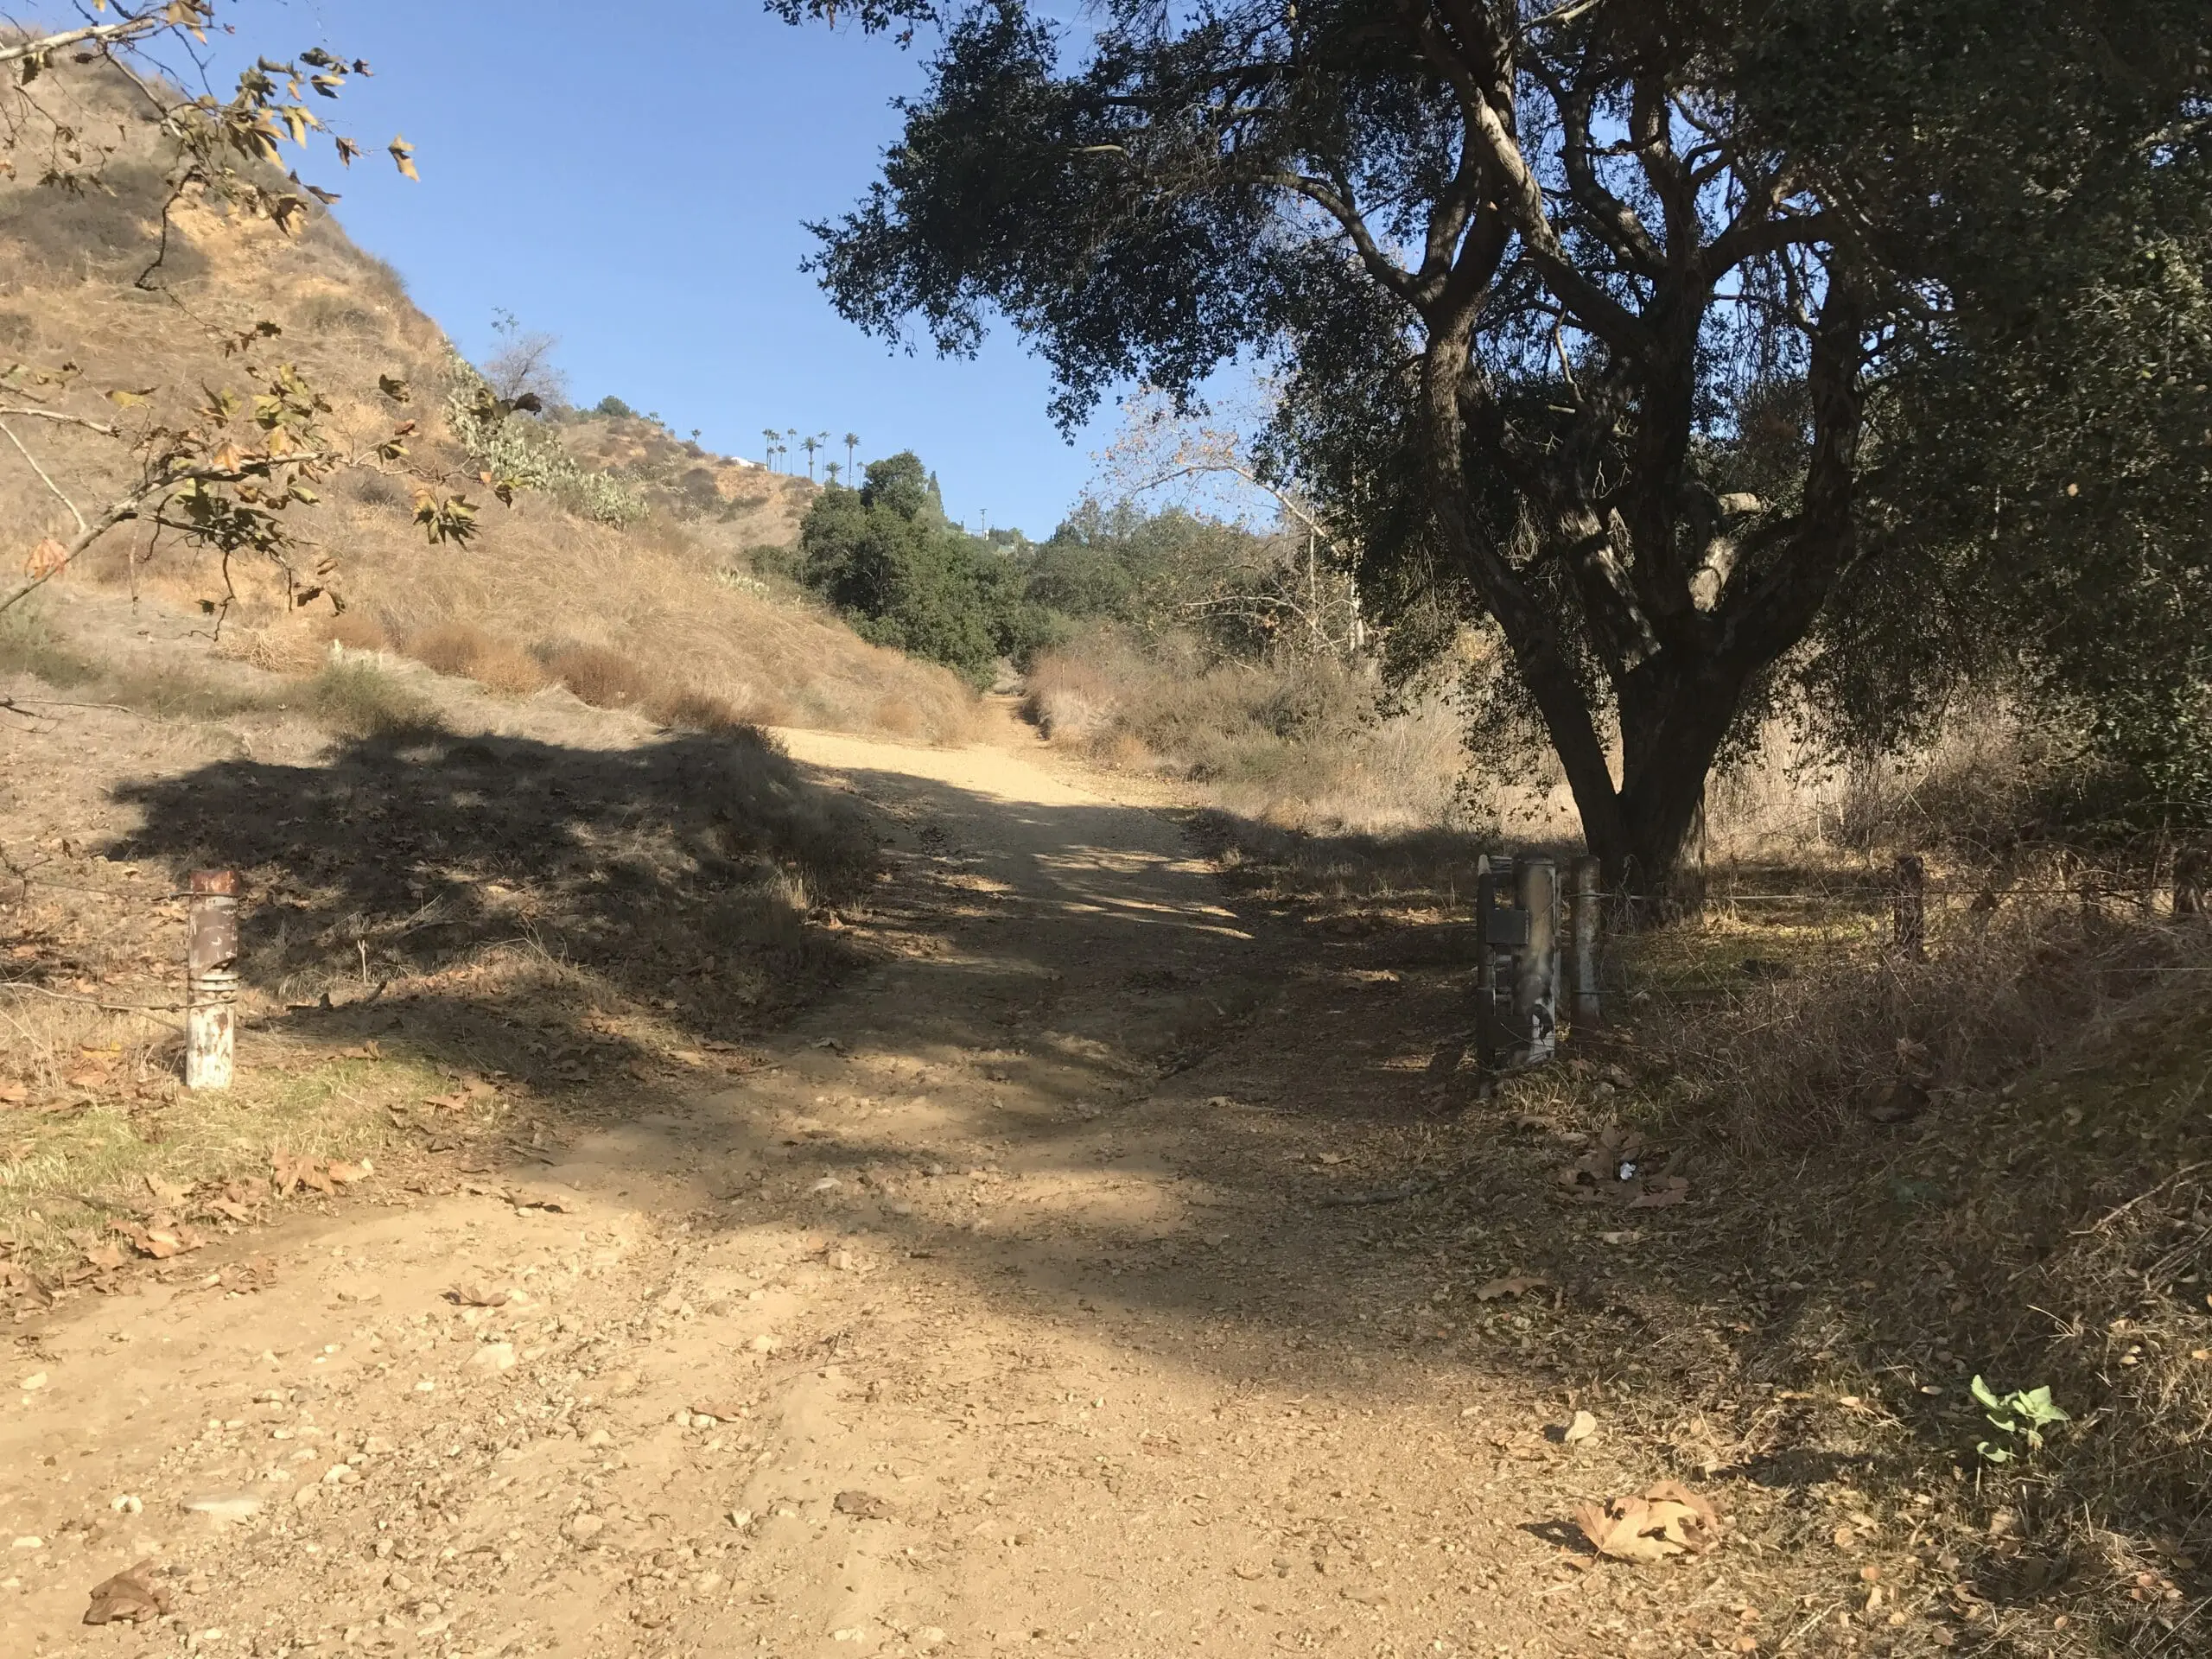 Turnbull Canyon Trail fence